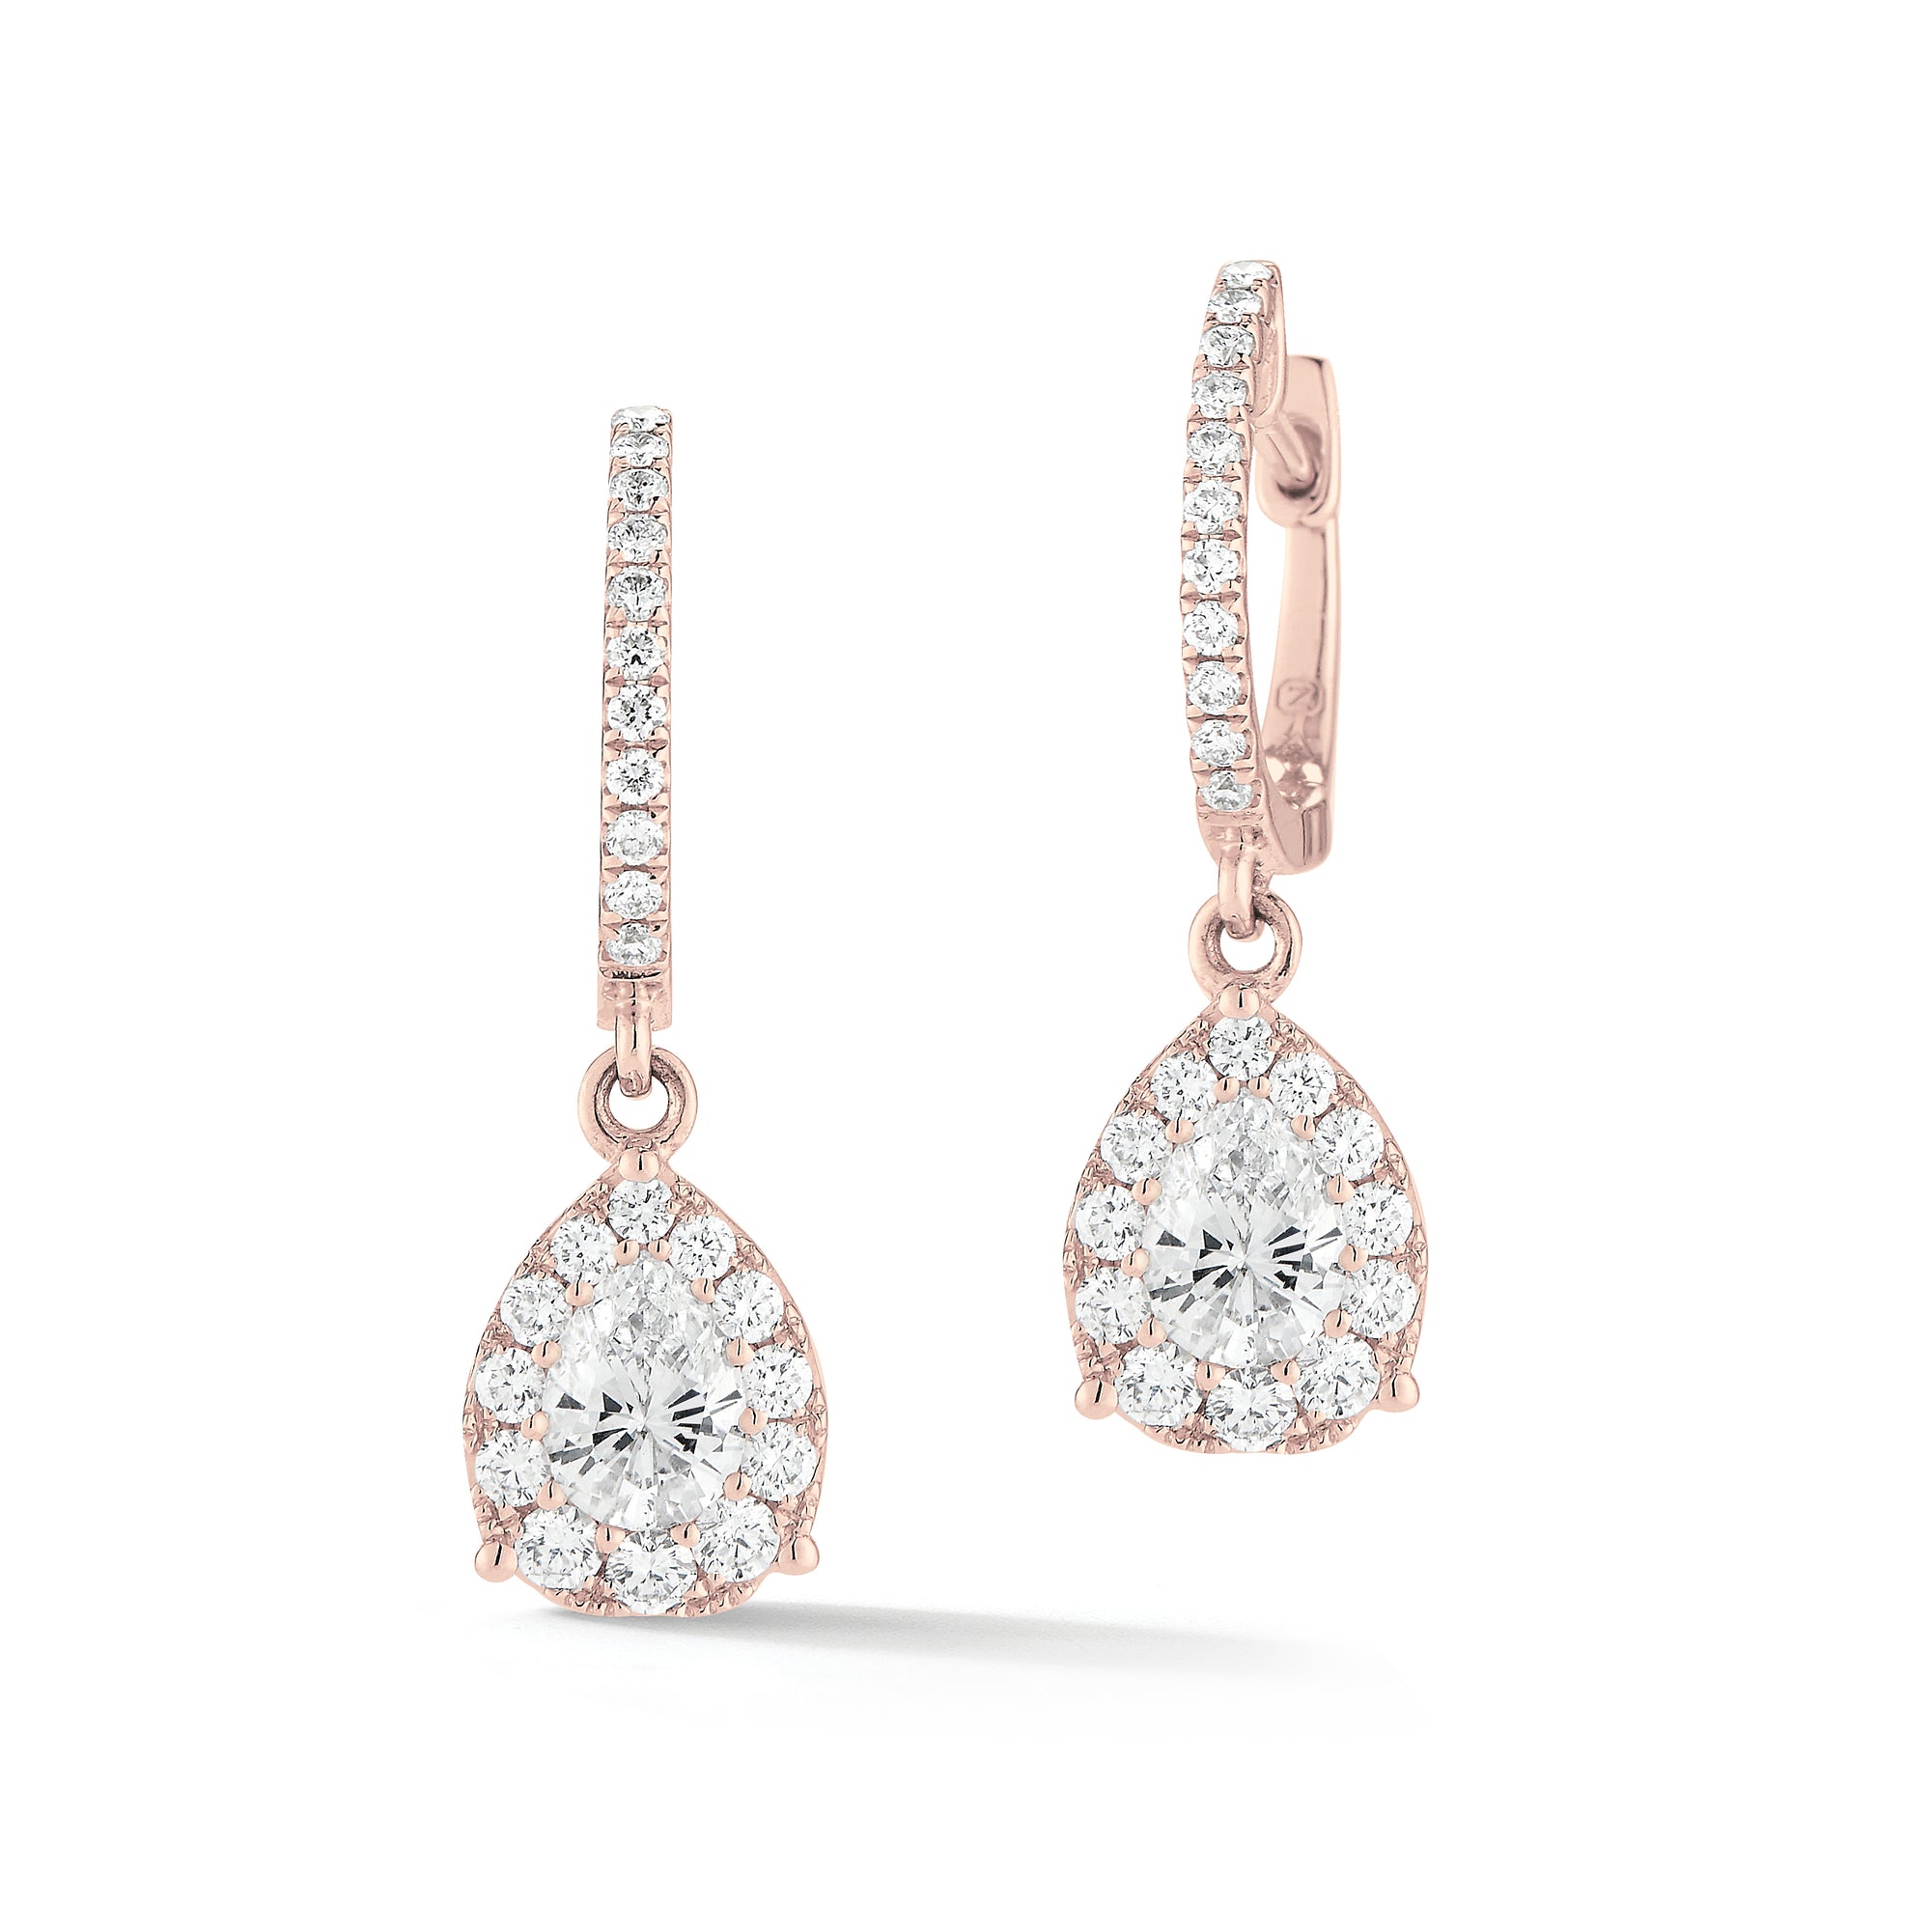 Diamond Pear-Shaped Halo Drop Earrings  -18K gold weighing 3.15 grams  -46 round shared prong-set diamonds totaling 0.49 carats  -2 pear-shaped diamonds totaling 0.66 carats.  Length 24 millimeters, width 7 millimeters.